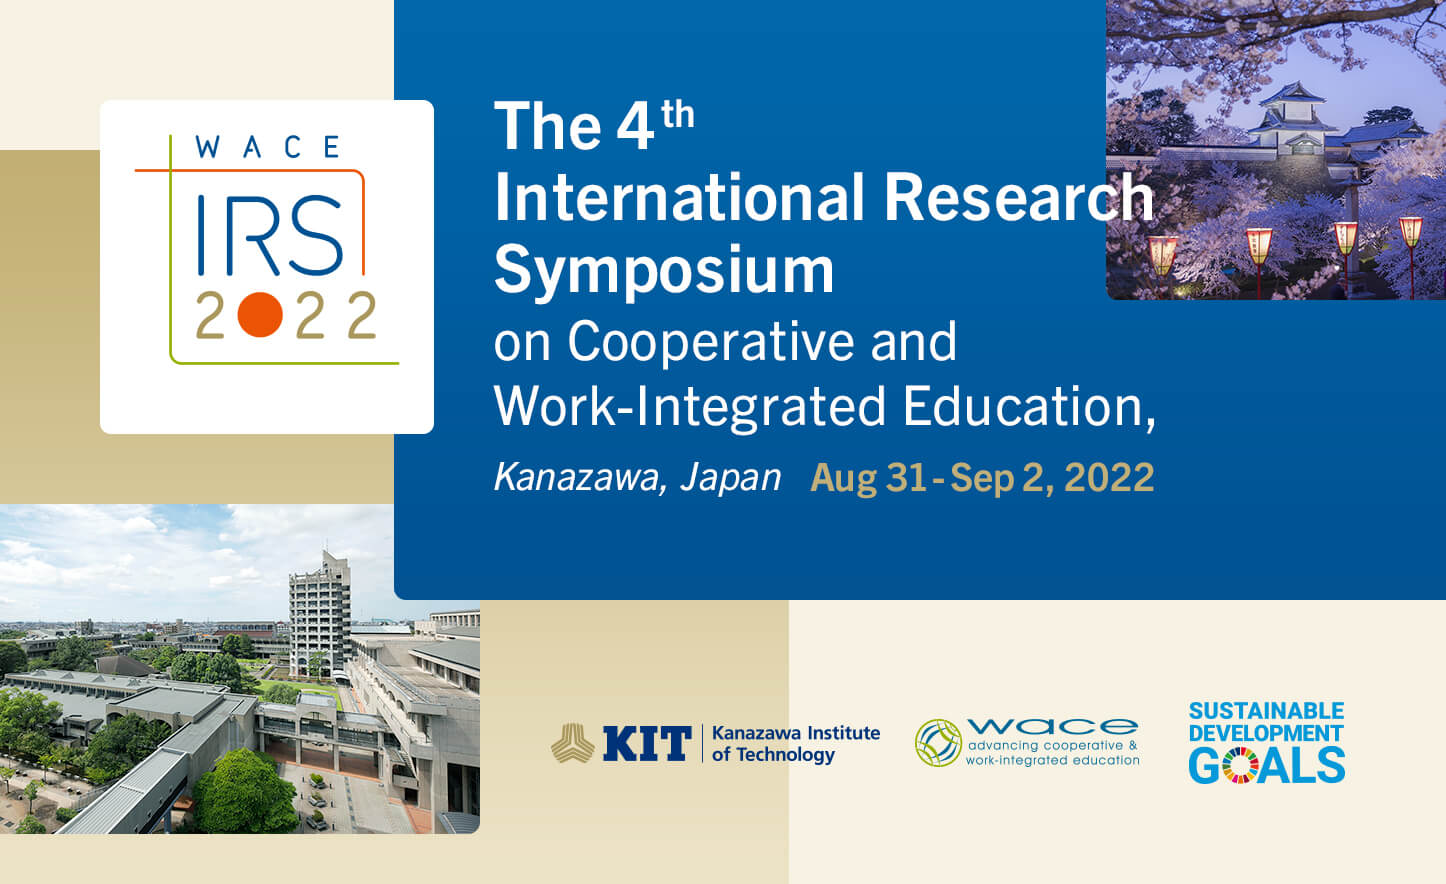 WACE The 4th International Research Symposium 2022